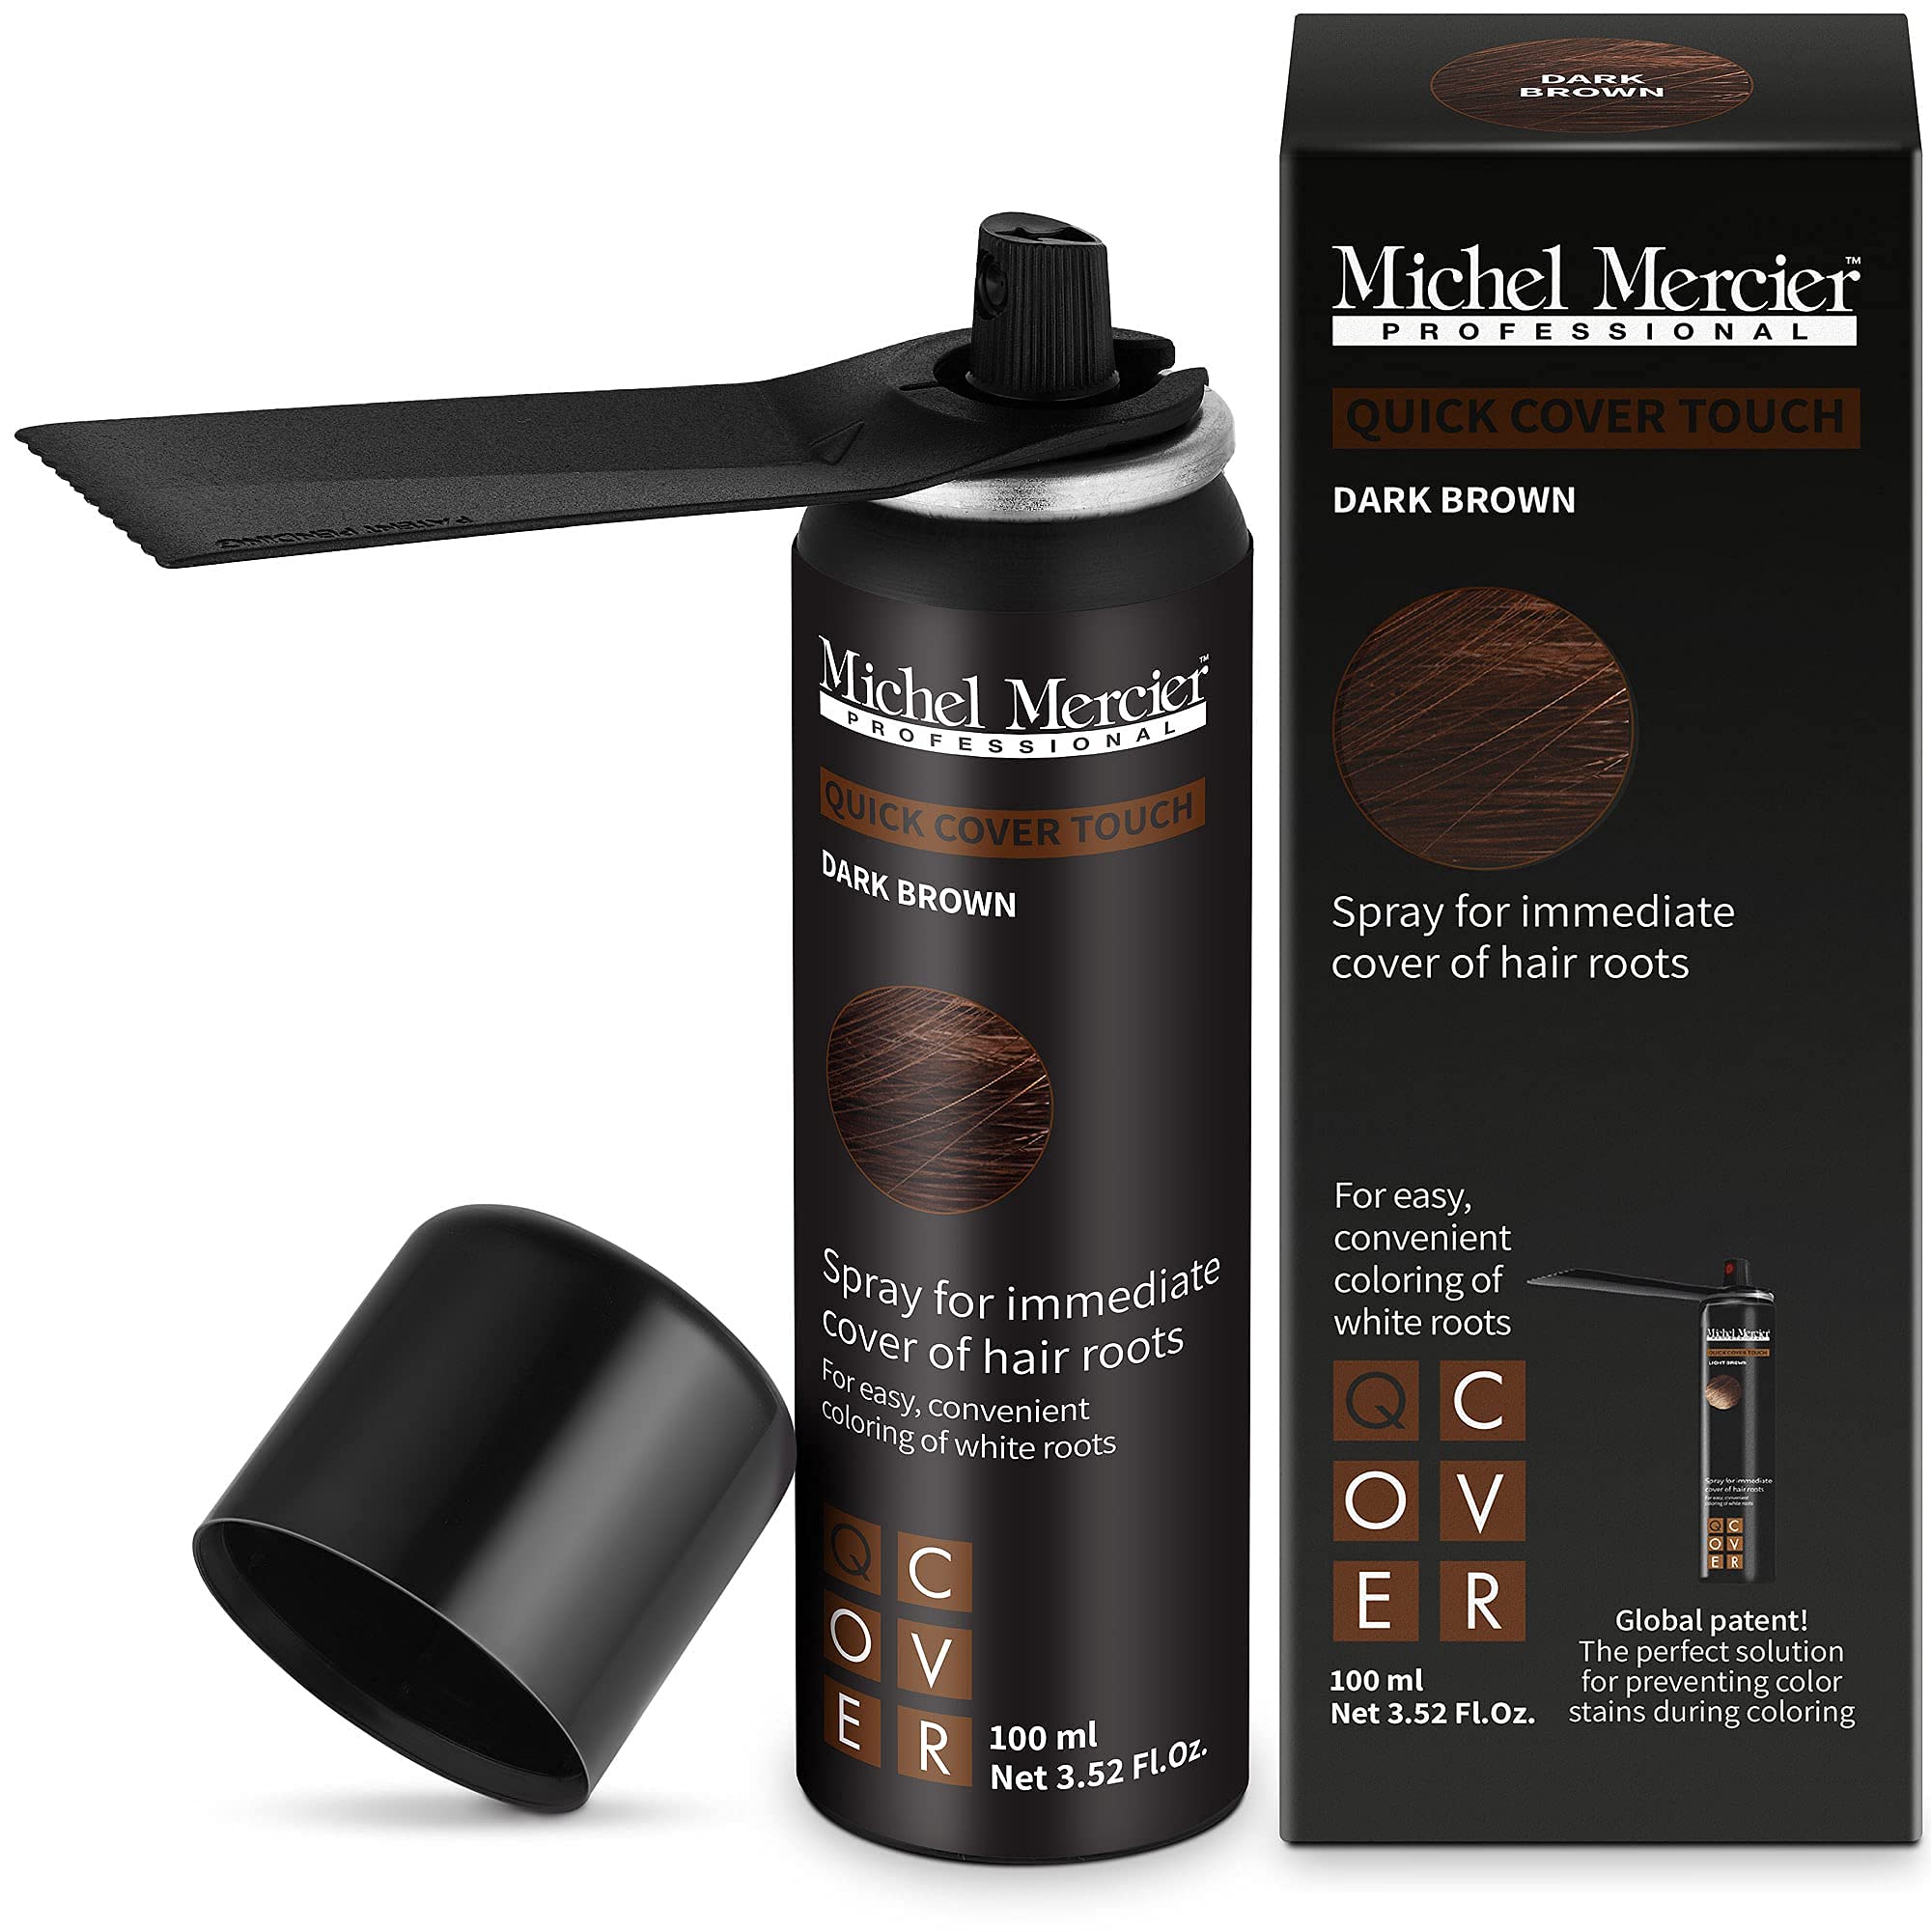 Michel Mercier Hair Root Touch Up Spray with Unique Applicator, Protects  Hairline and Scalp Health, Fast and Easy Grey Hair Cover Up Concealer for  Women and Men, Instant Gray Coverage (Dark Brown)